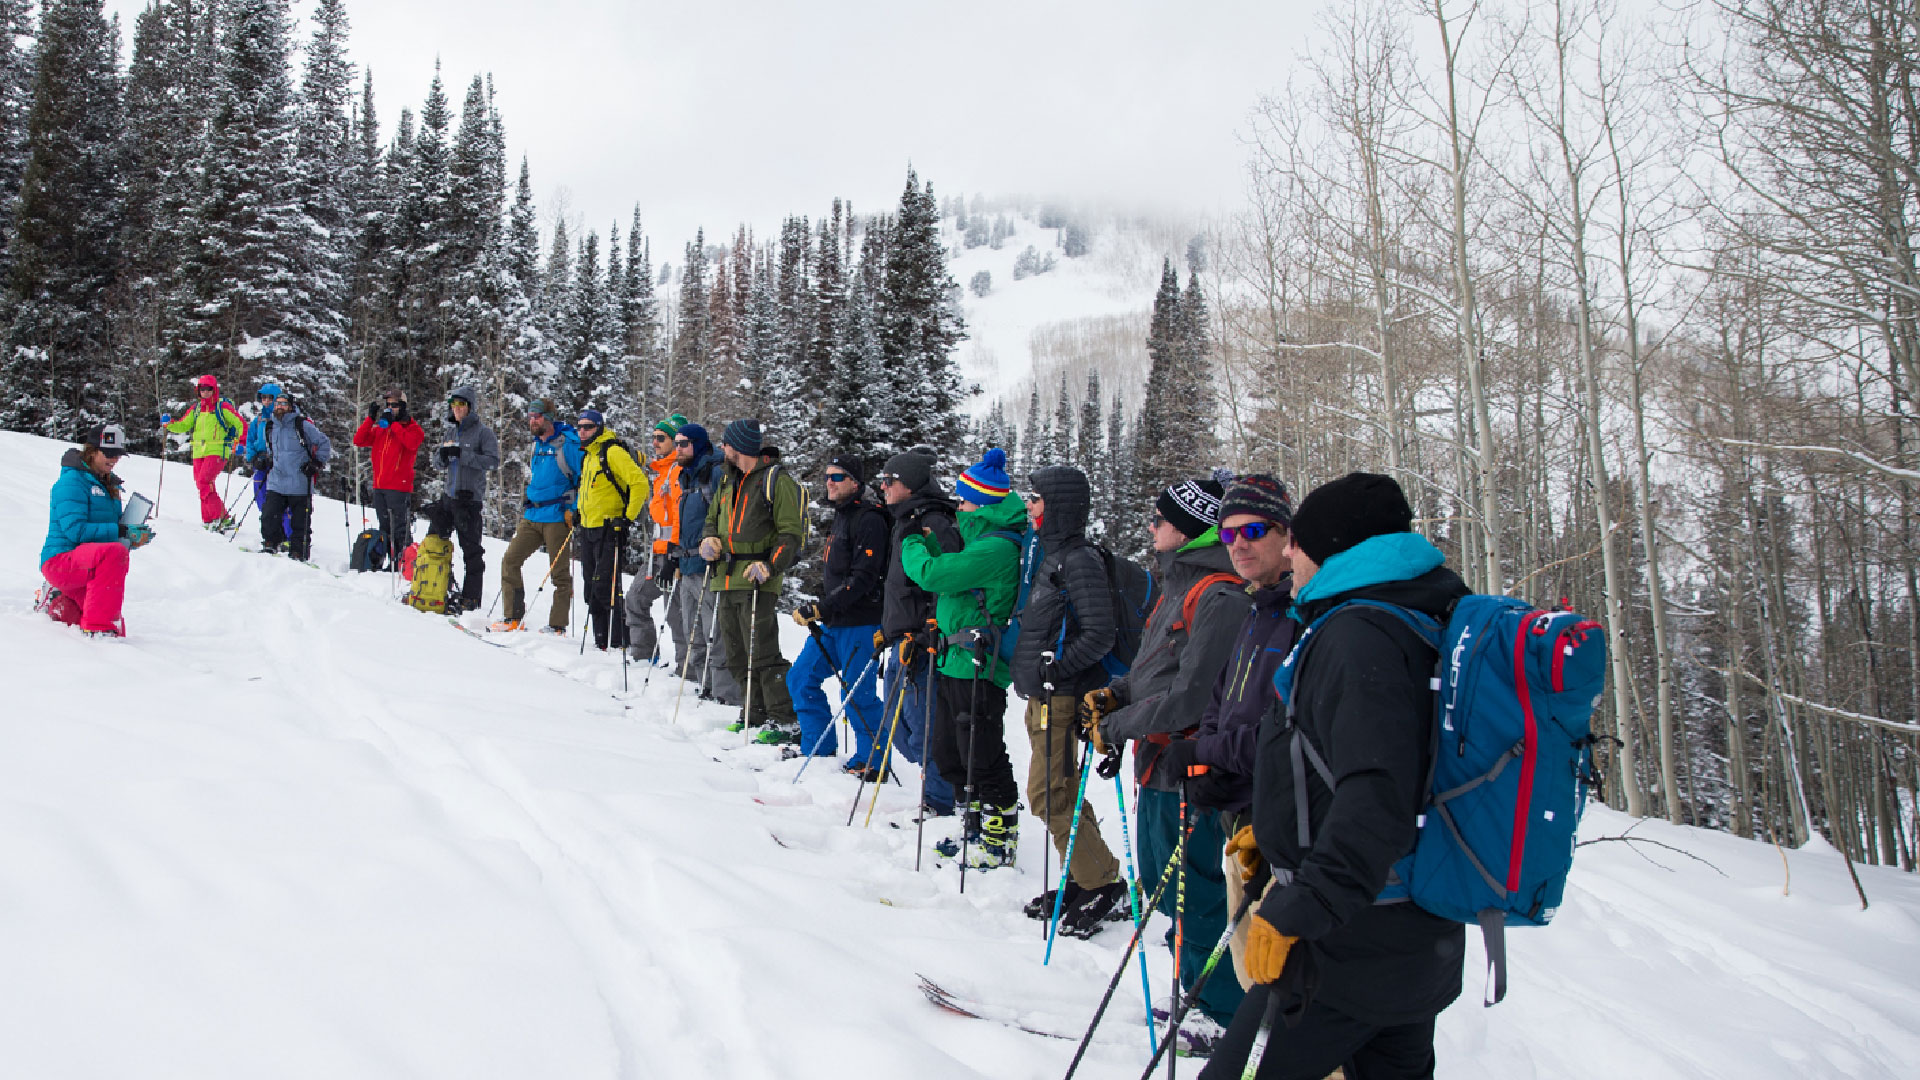 AIARE Level 2 Avalanche Course from White Pine Touring in Park City, UT.